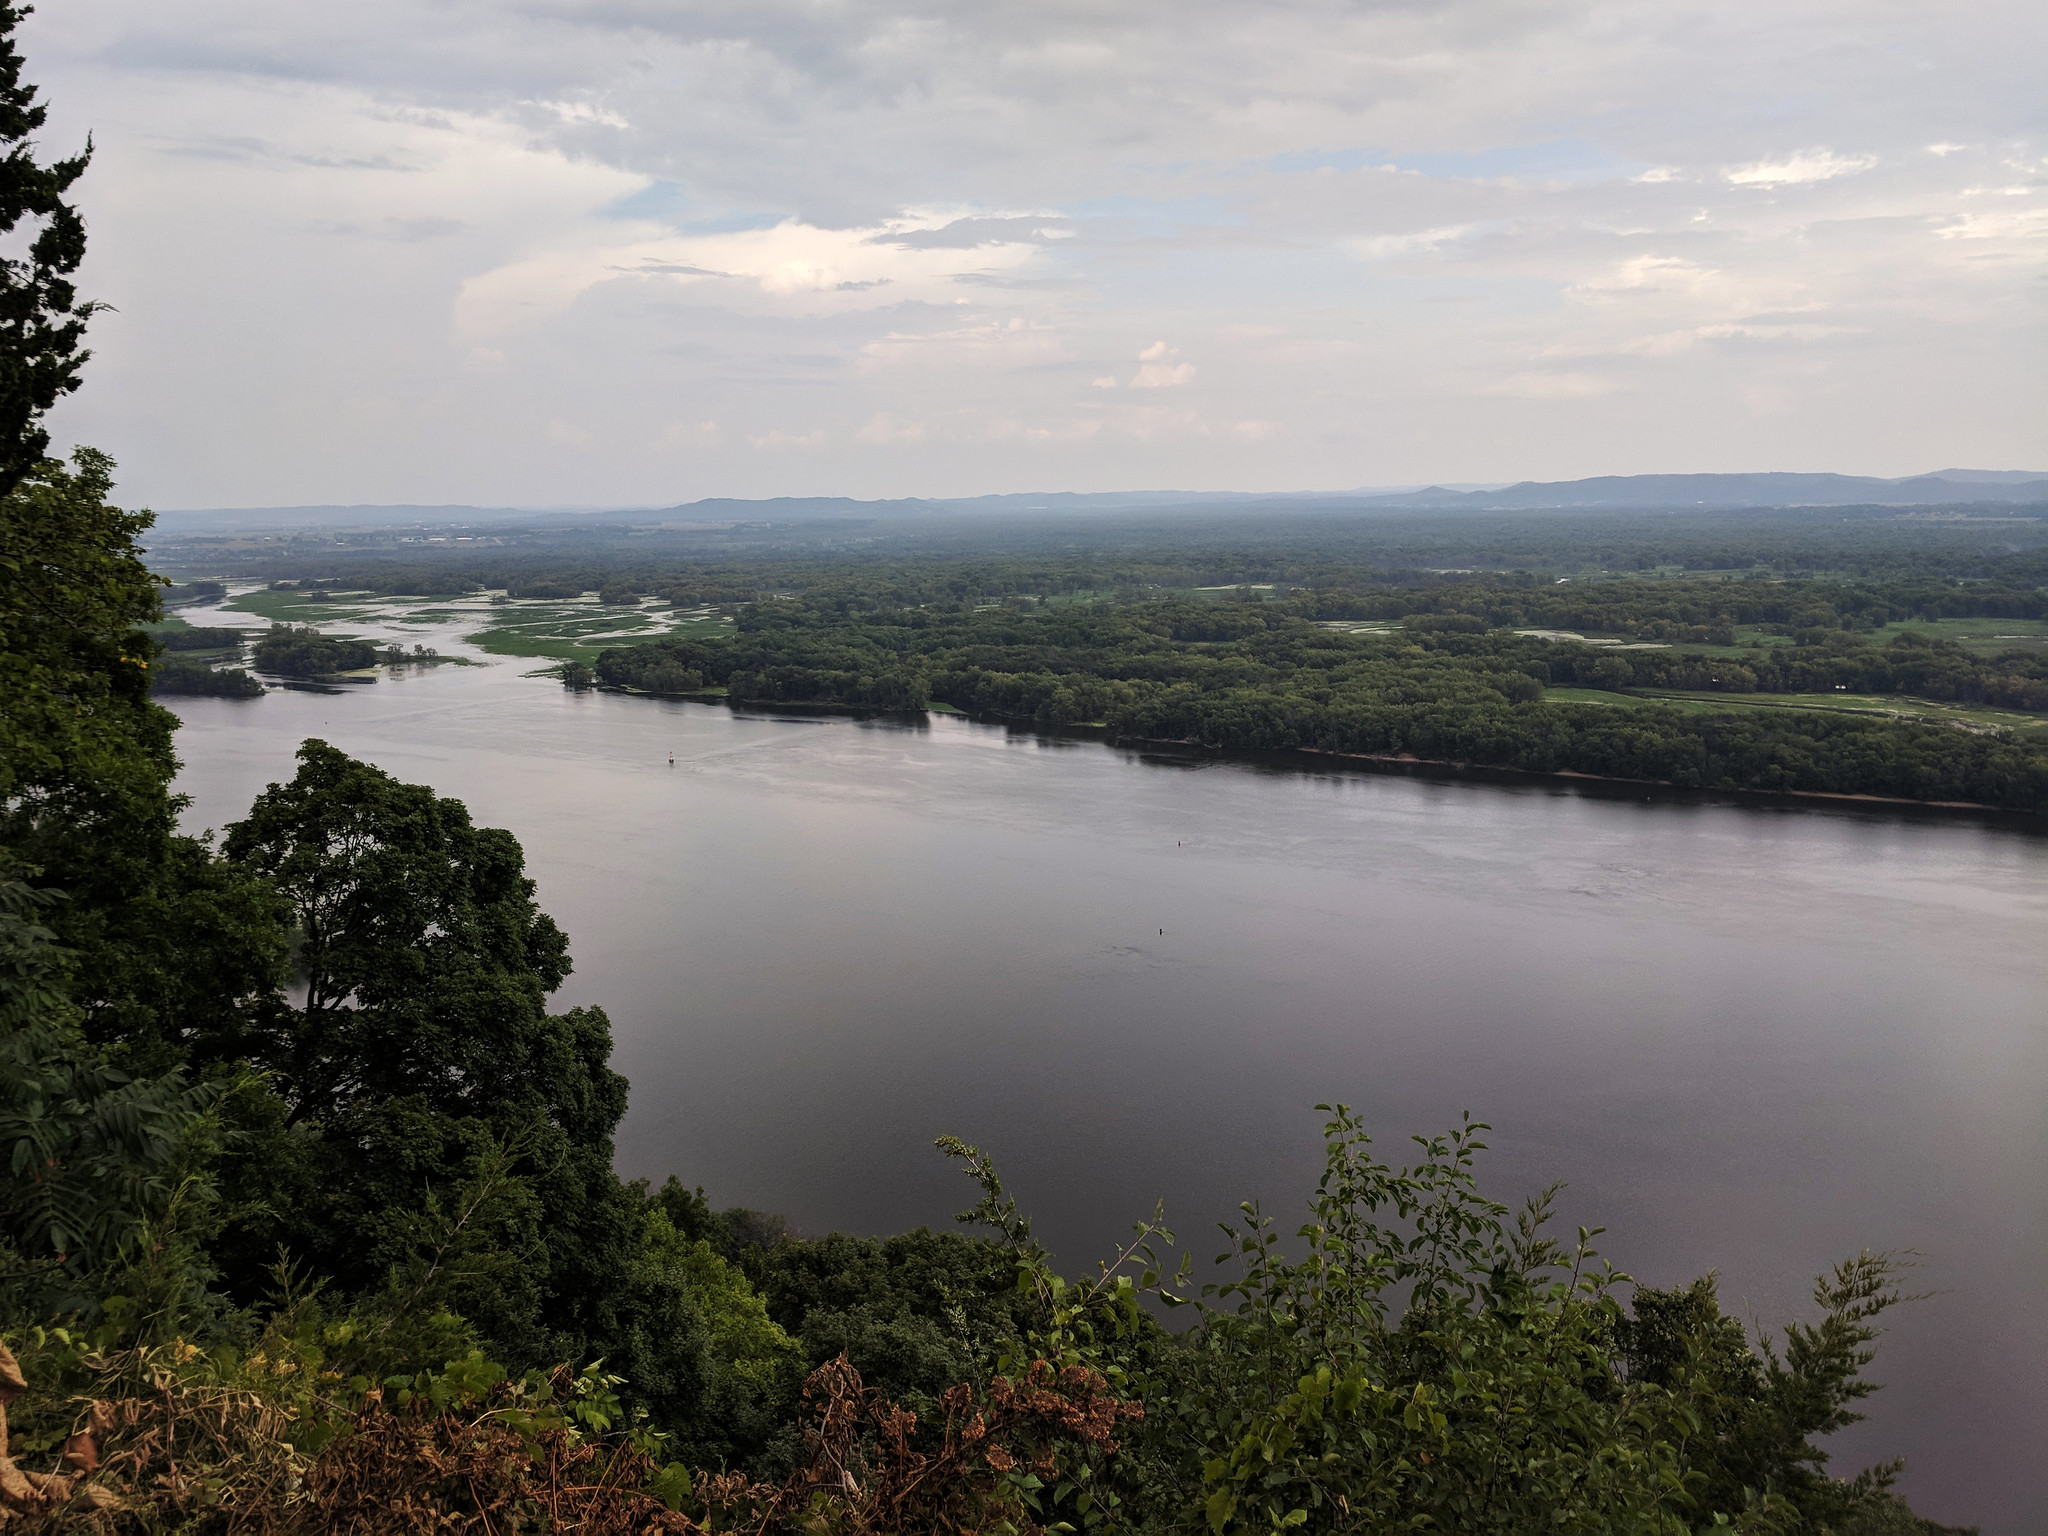 Overlooking the Mississippi River and Upper Mississippi River National Wildlife and Fish Refuge